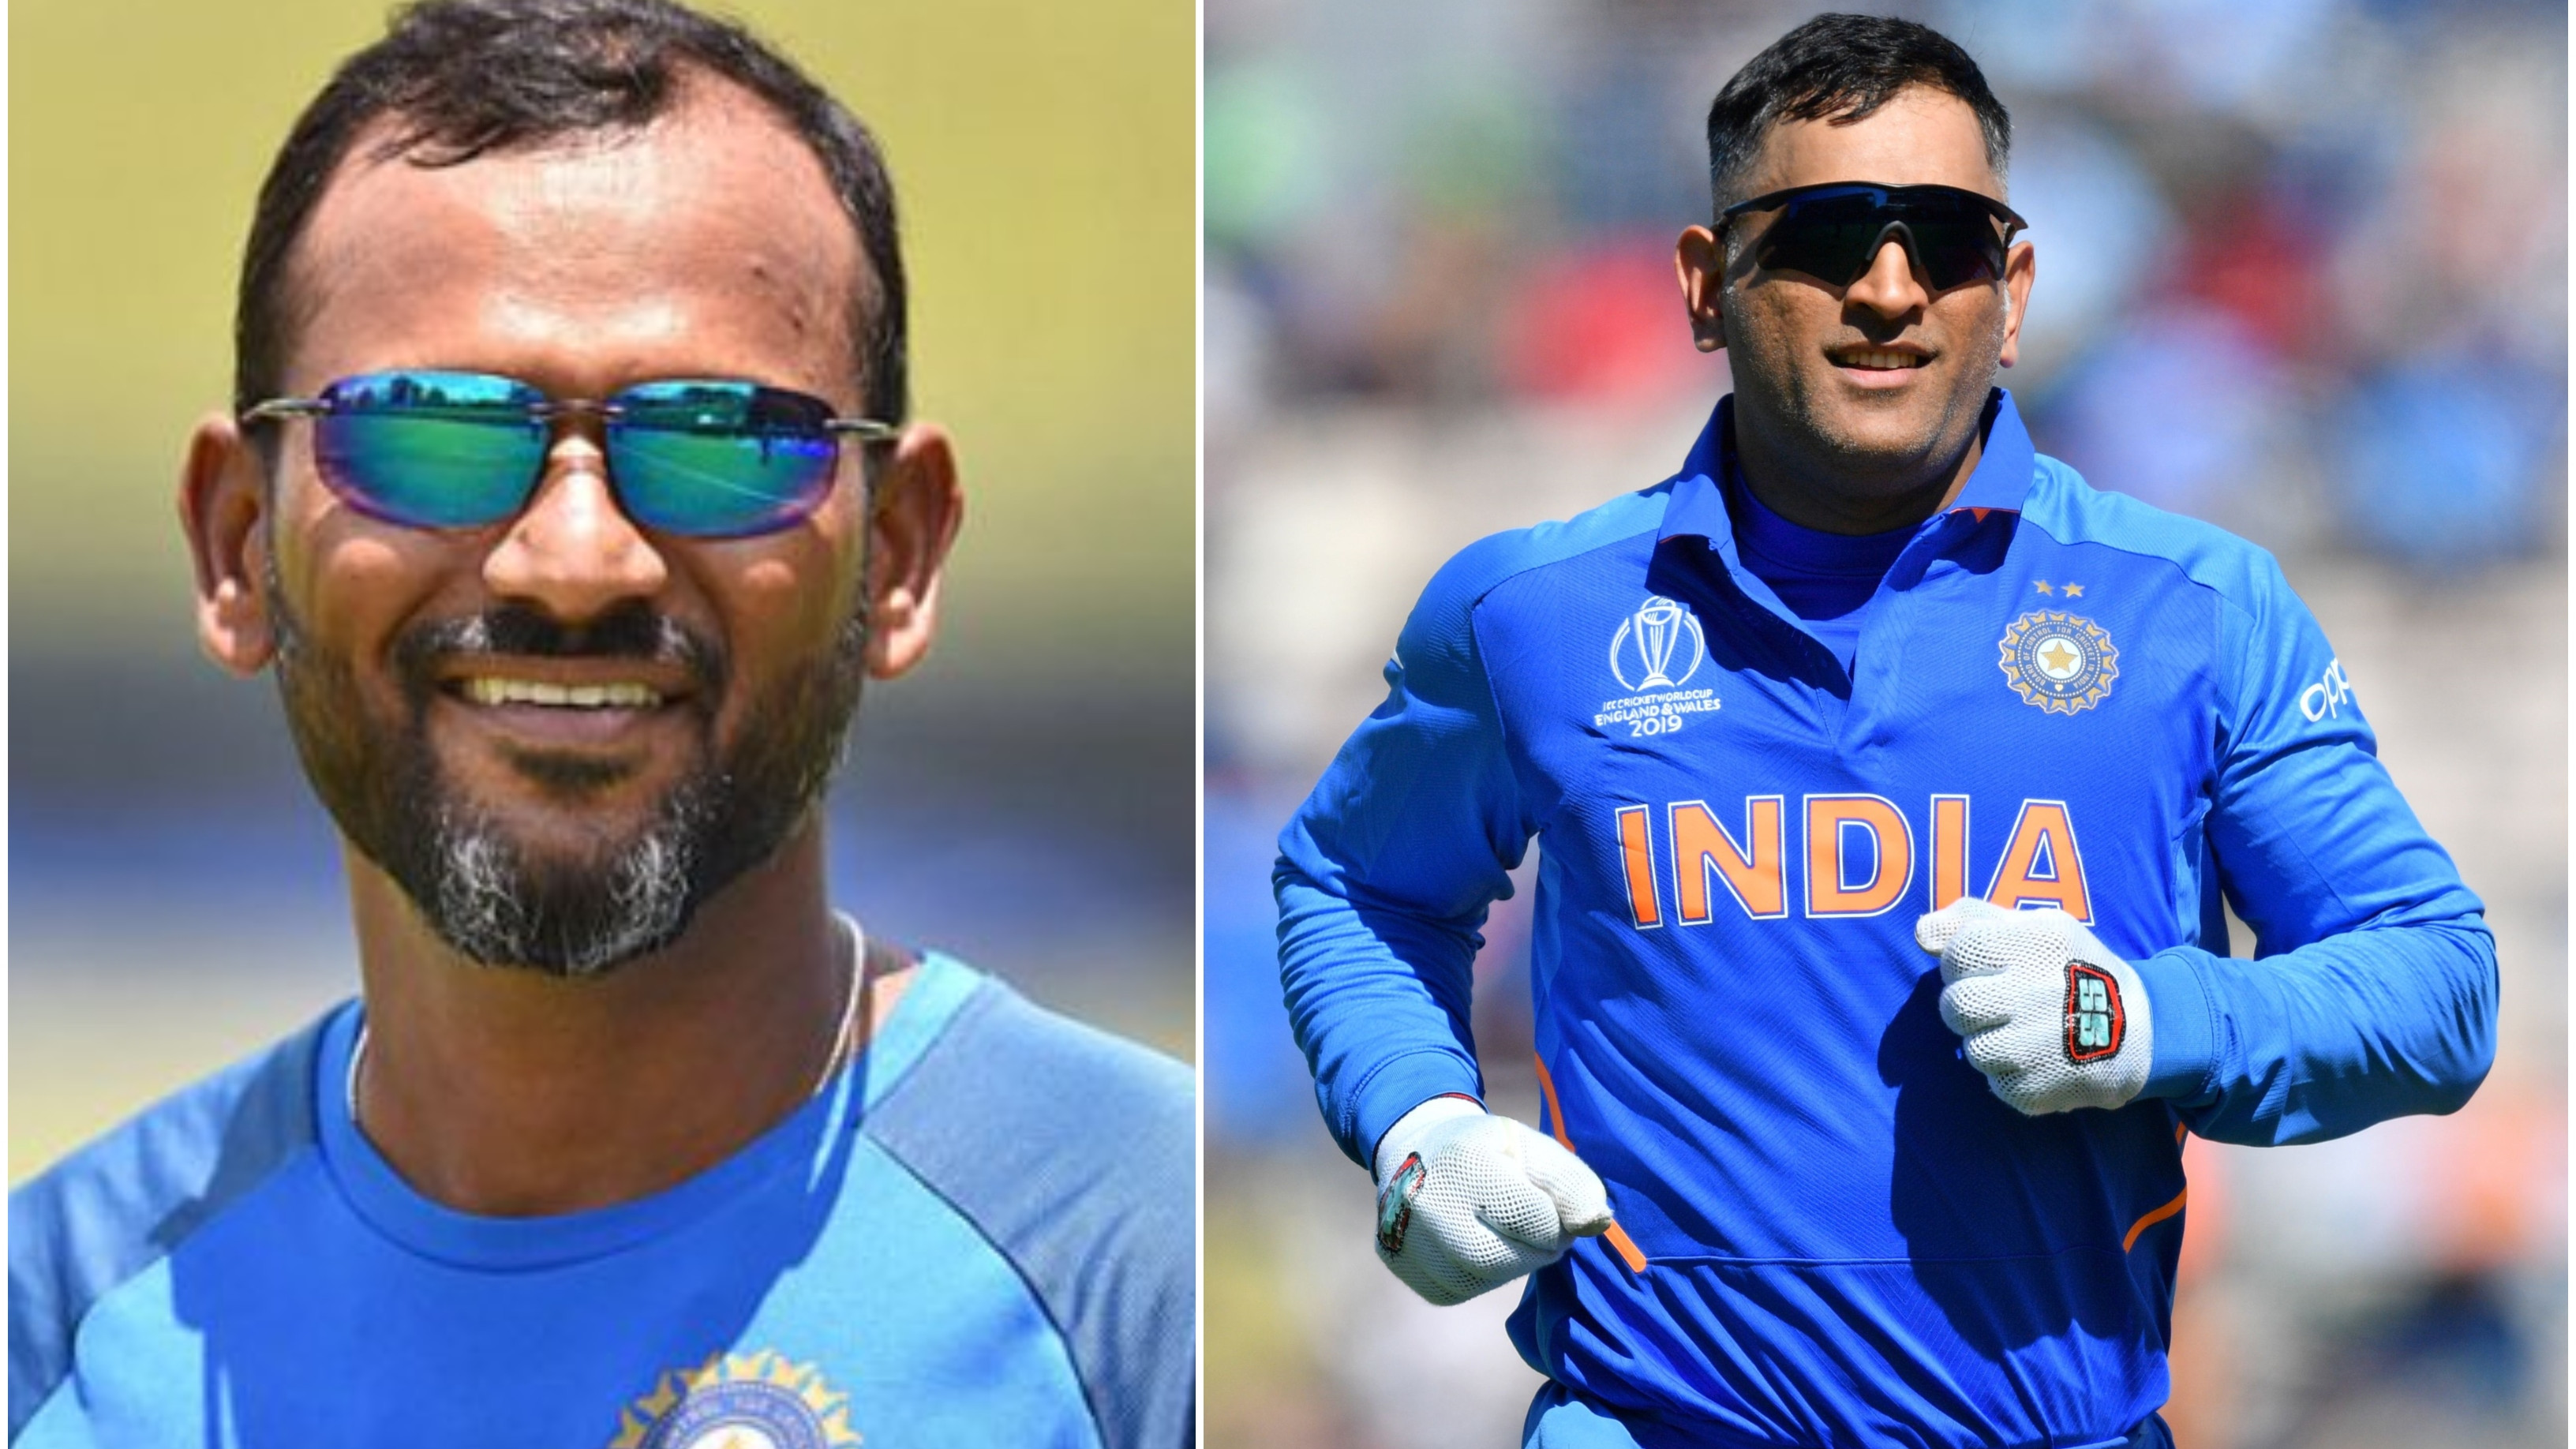 ‘MS Dhoni the wicketkeeper is an institution in himself’: R Sridhar